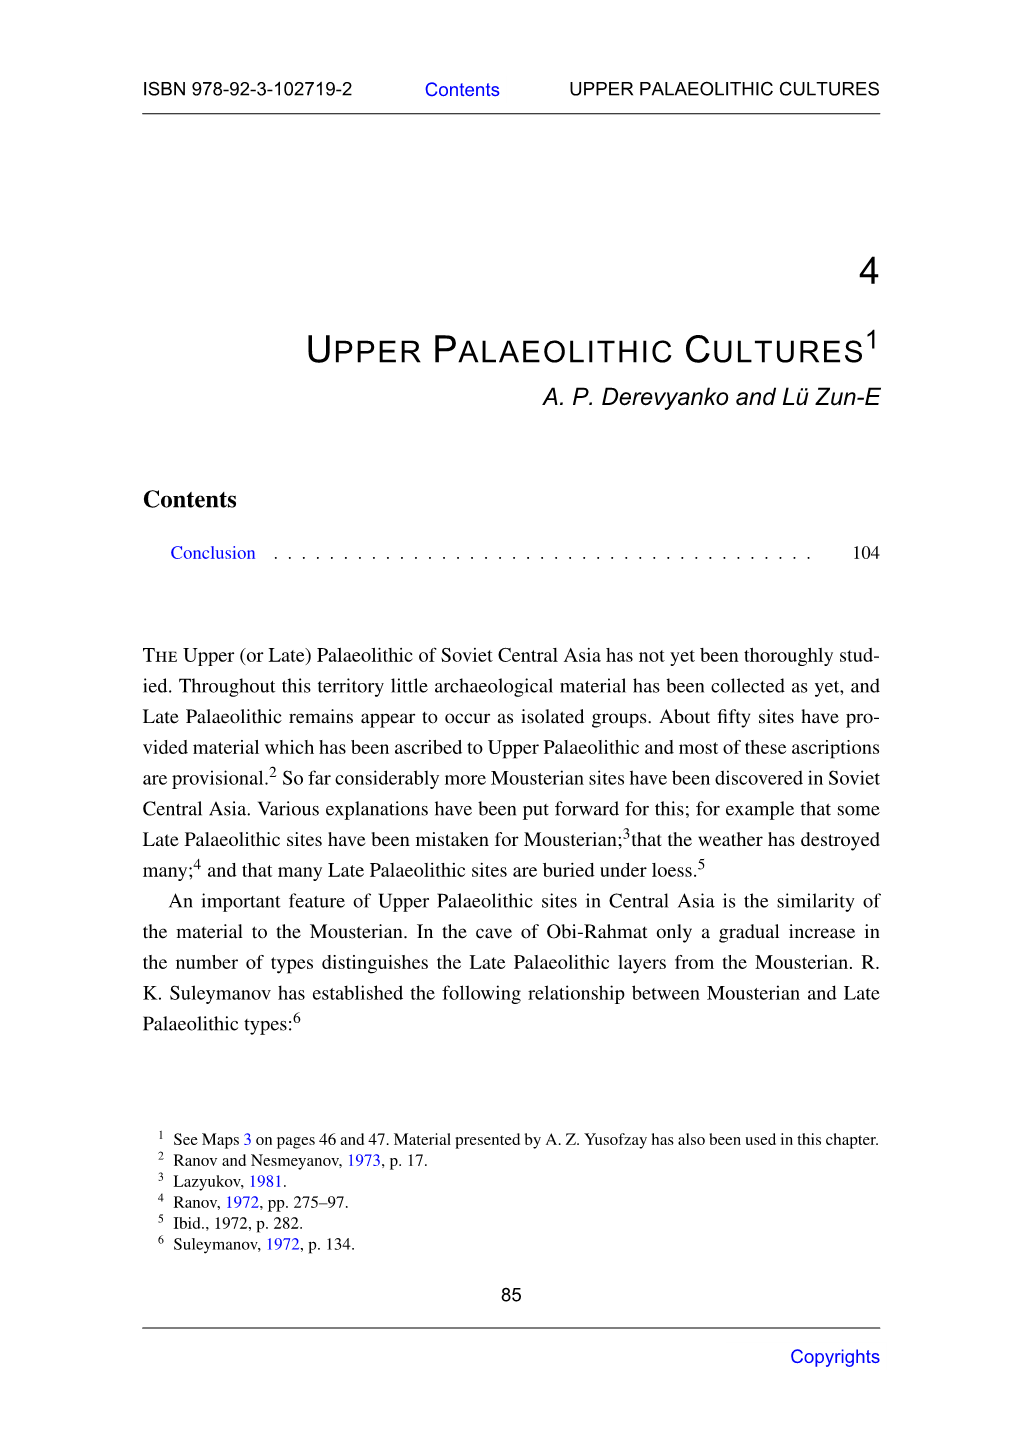 Upper Palaeolithic Cultures